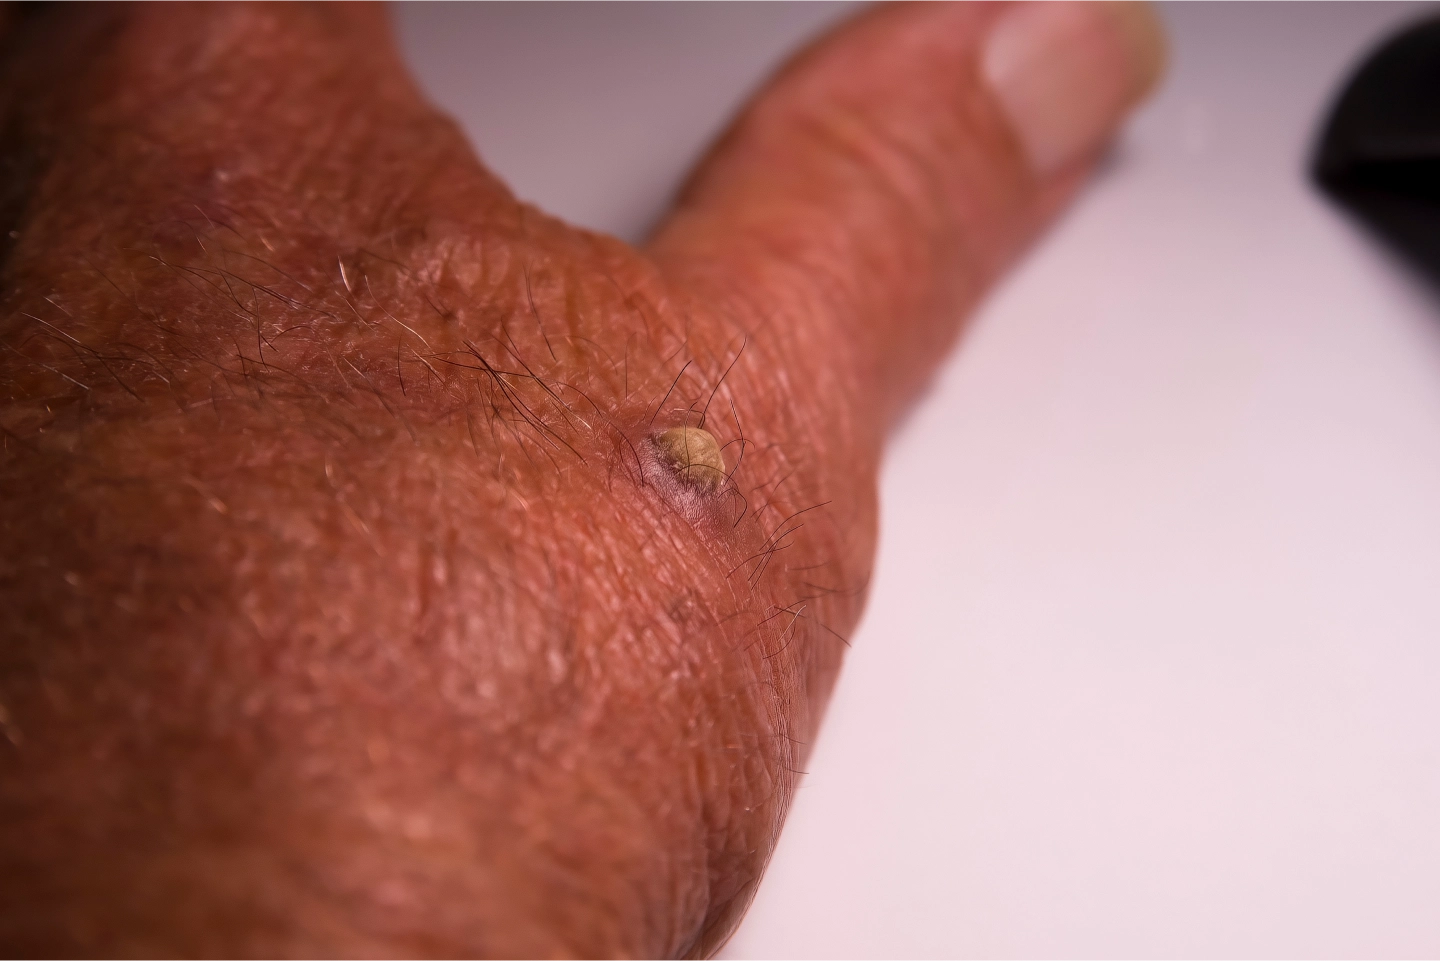 Patient suffer from squamous cell carcinoma on hand